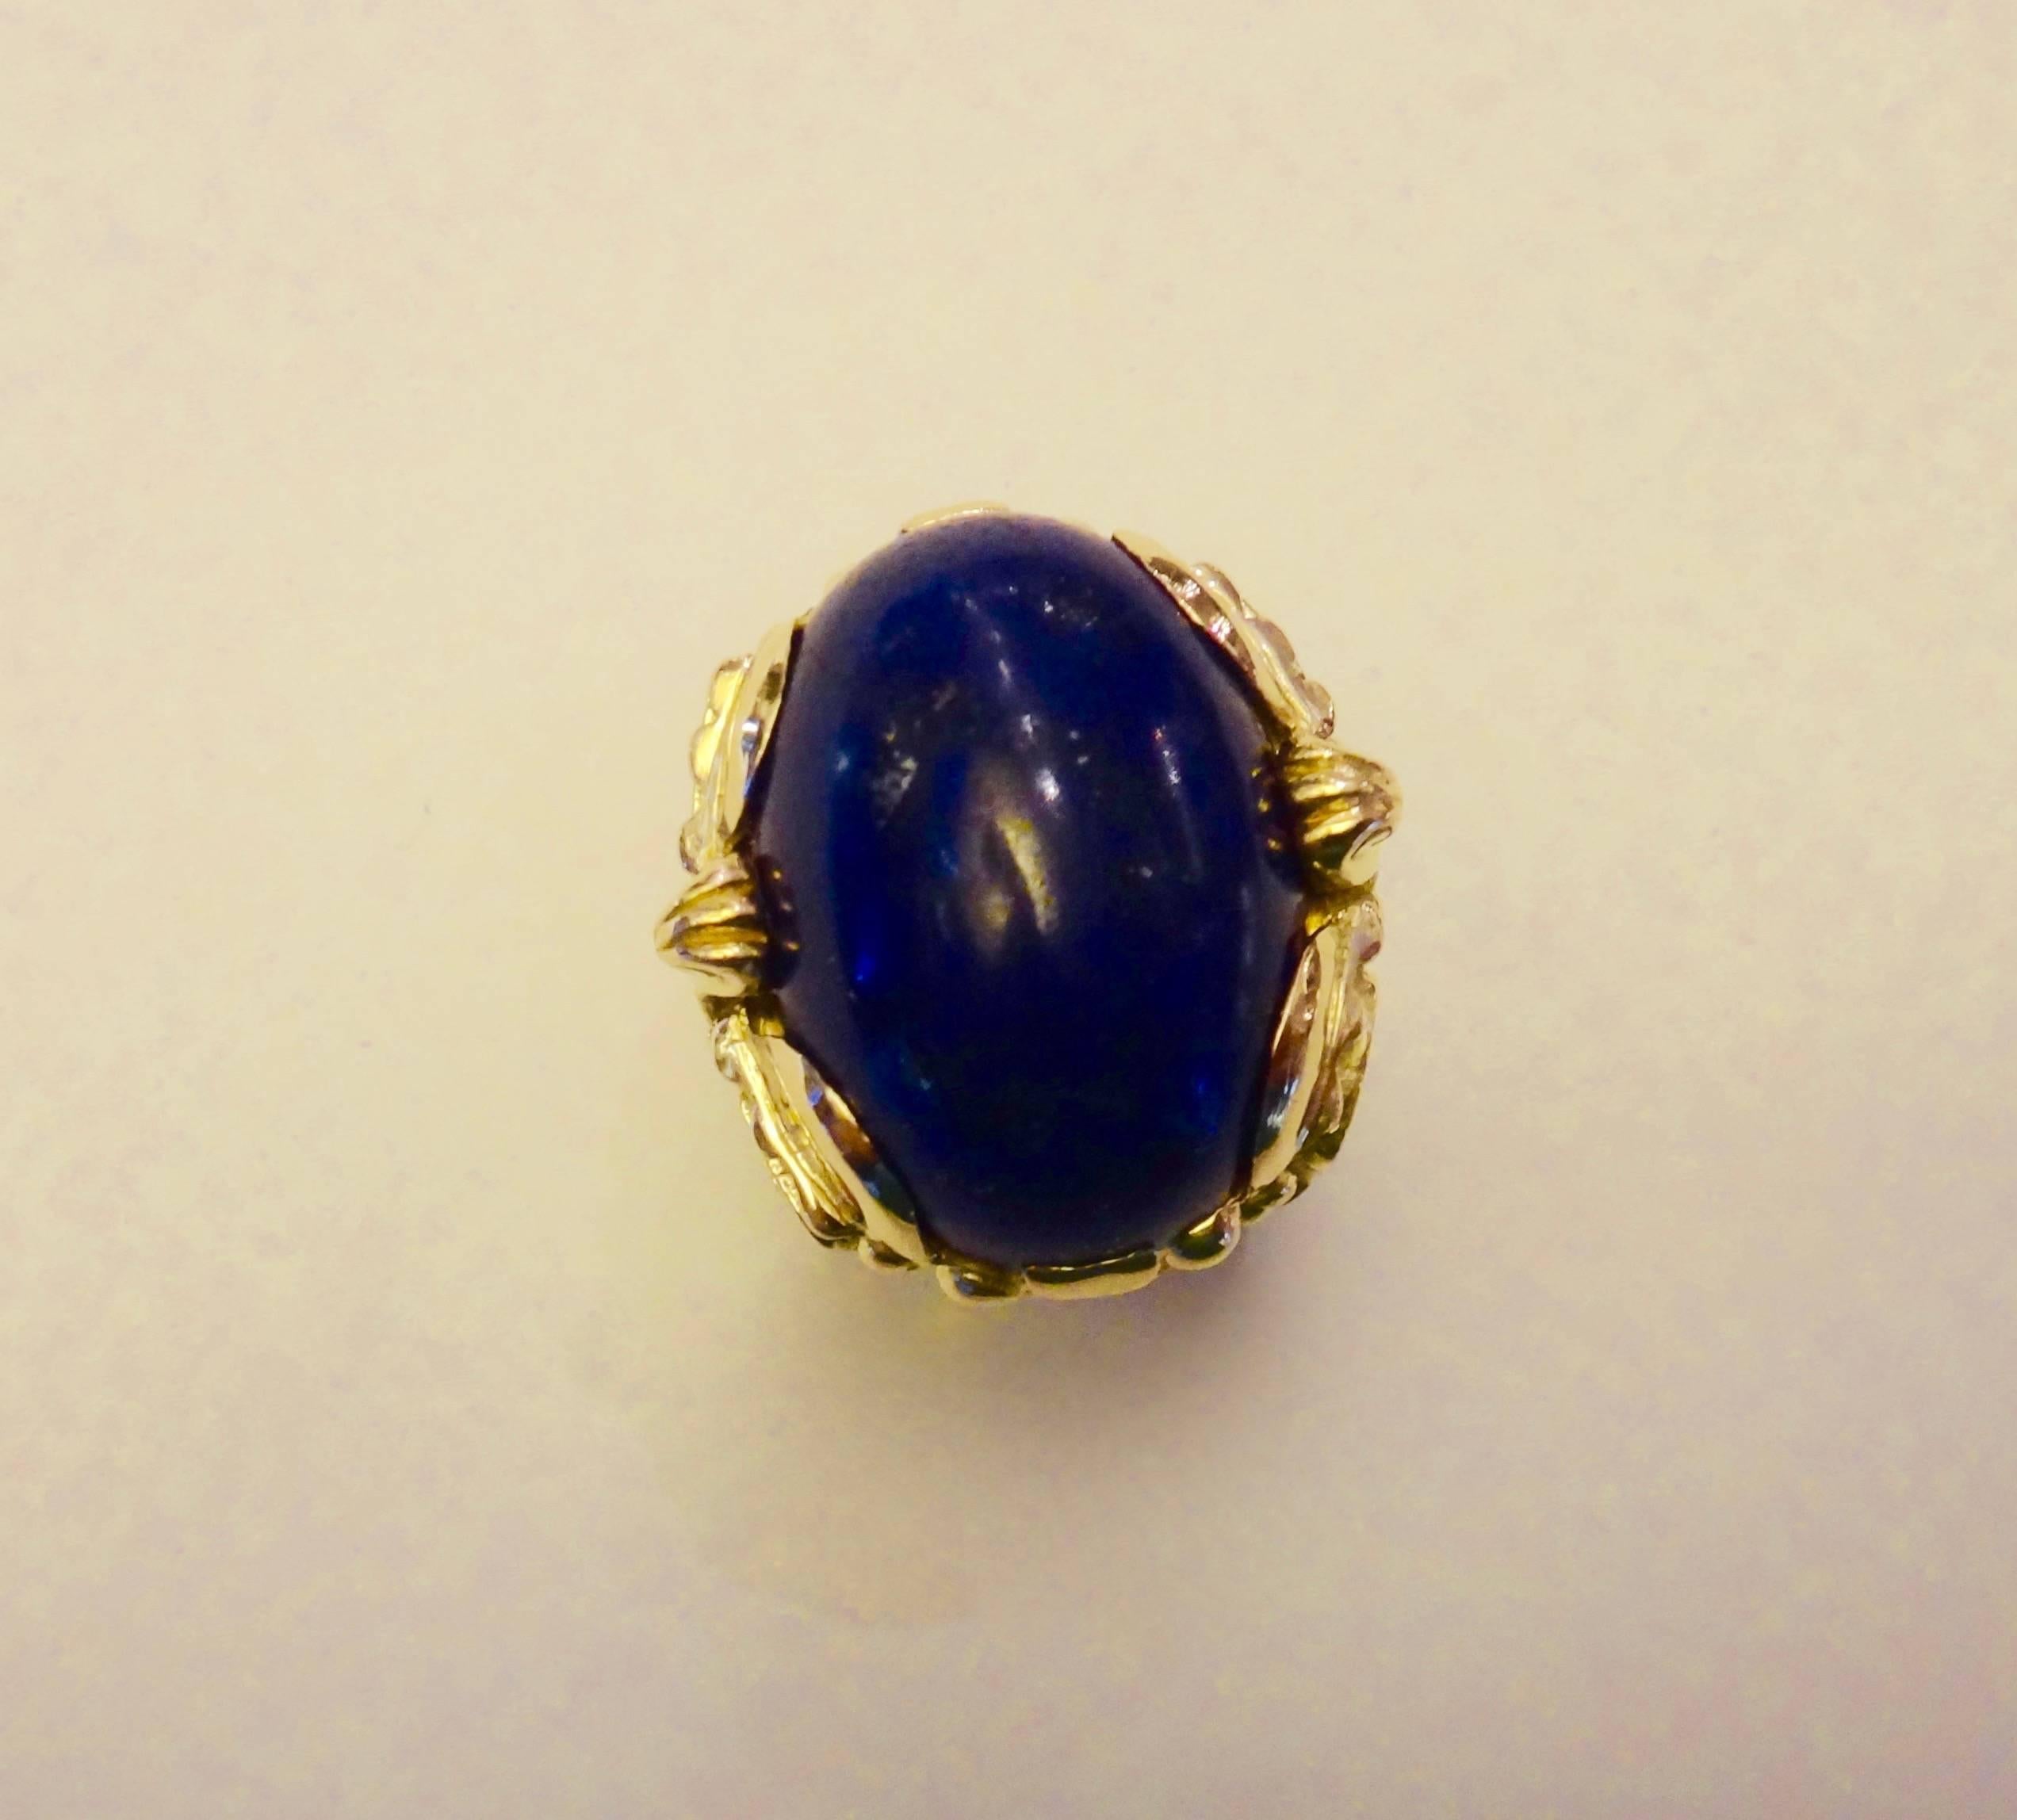 A large cabochon of Lapis Lazuli is set in this heavy 18k yellow gold ring by legendary goldsmith Norah Pierson of the Golden Eye located in Santa Fe, New Mexico.  The mounting has powerfully sculpted Aztec influenced images.  Ring size 8 and may to